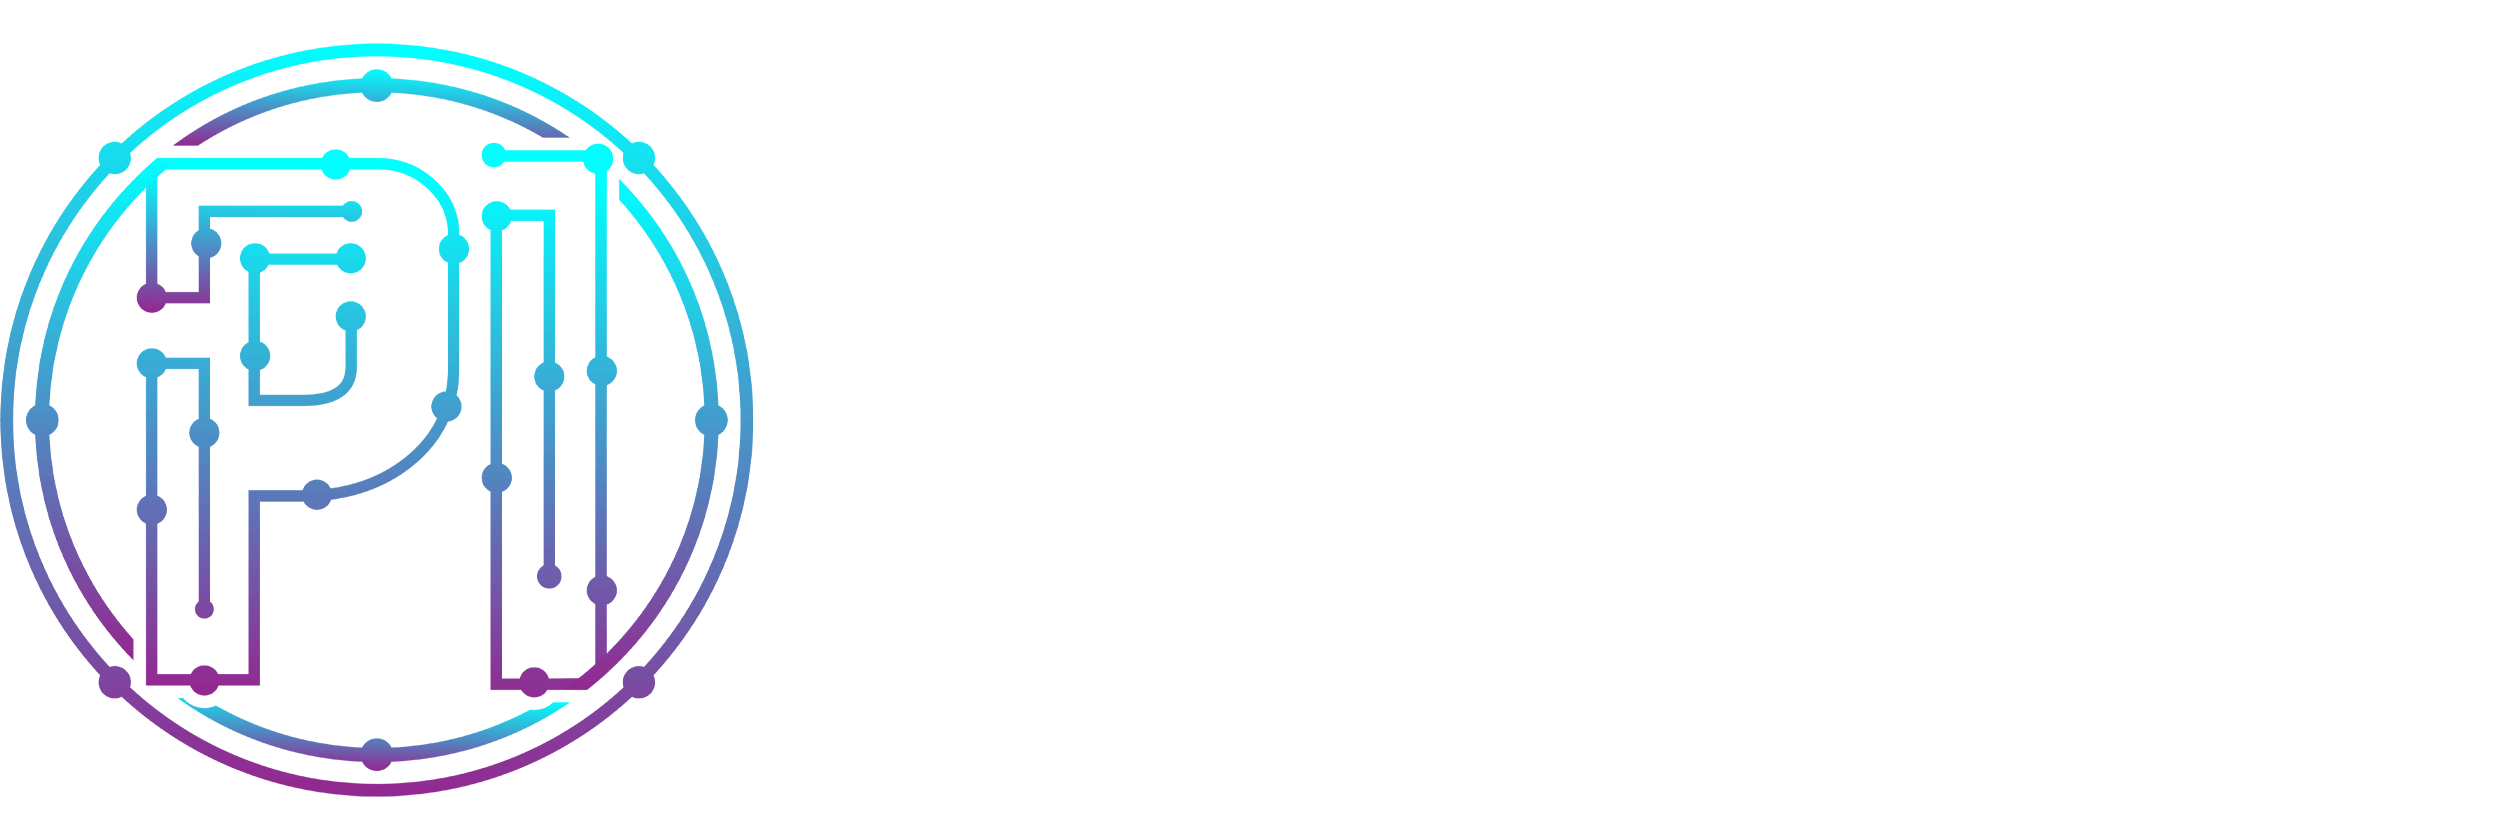 Practical Intelligence – Innovative Solutions To Unique Problems